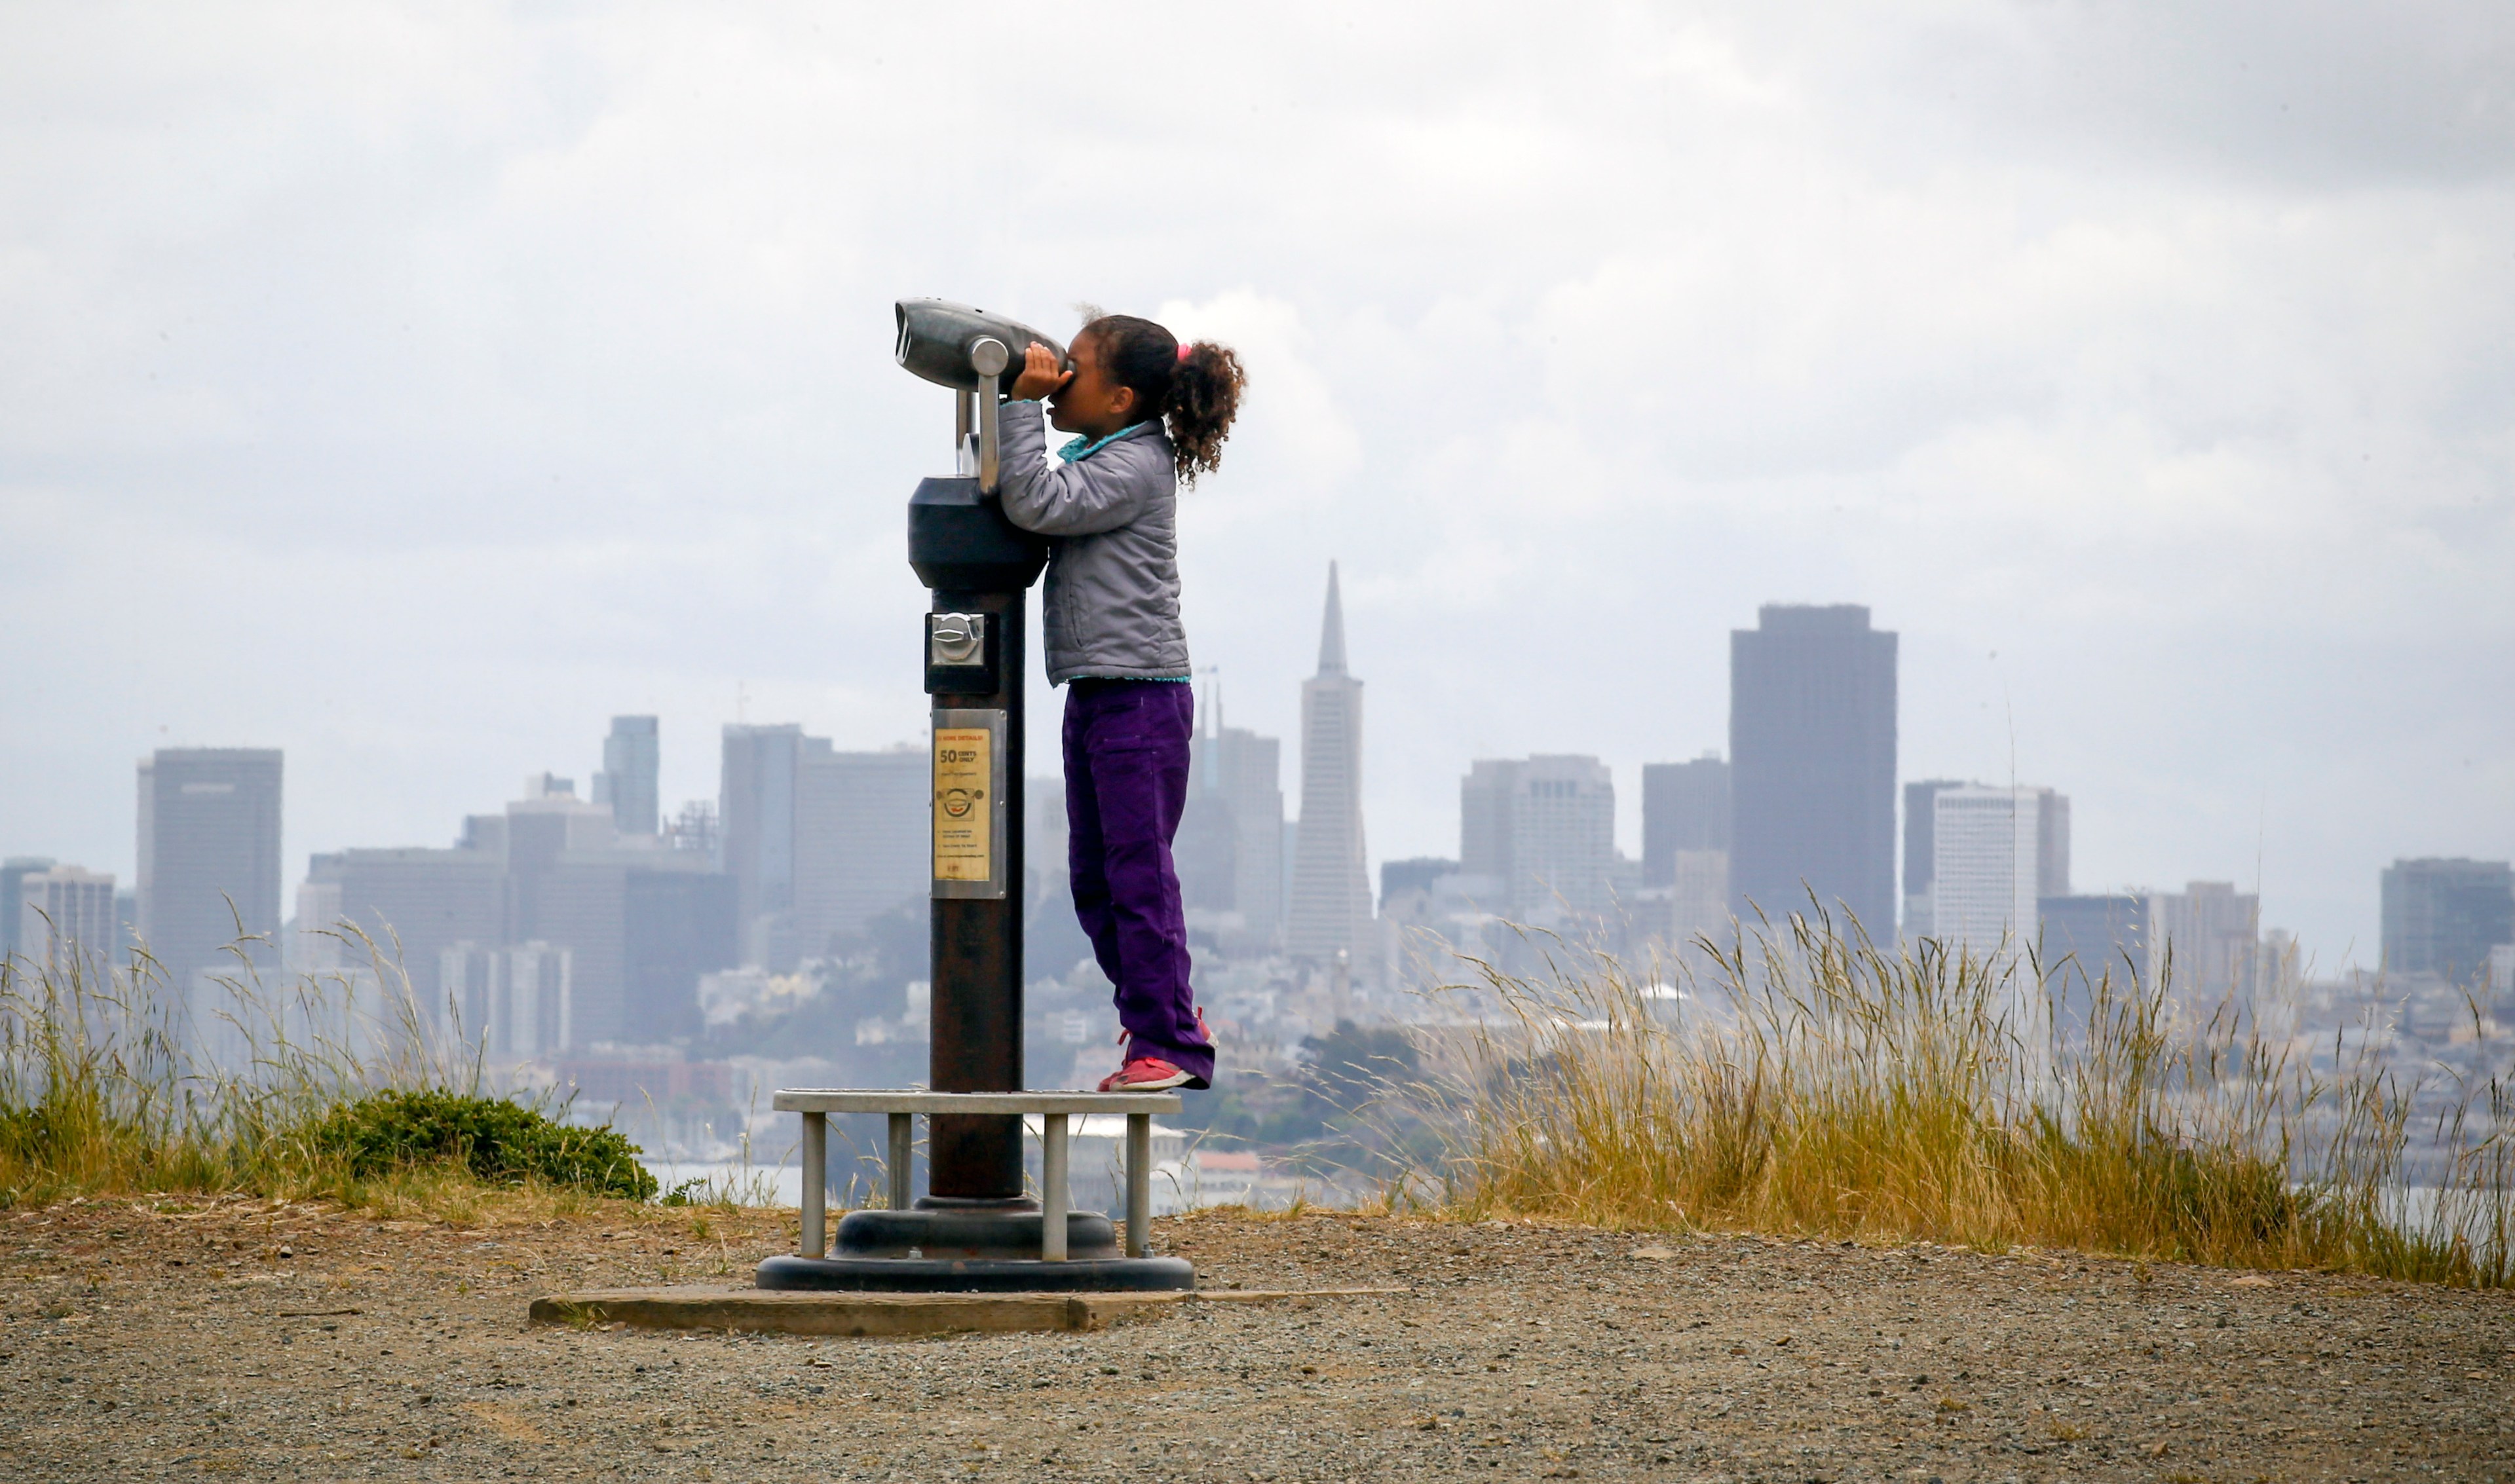 A child looks through a telescope with San Francisco skyline in the background.